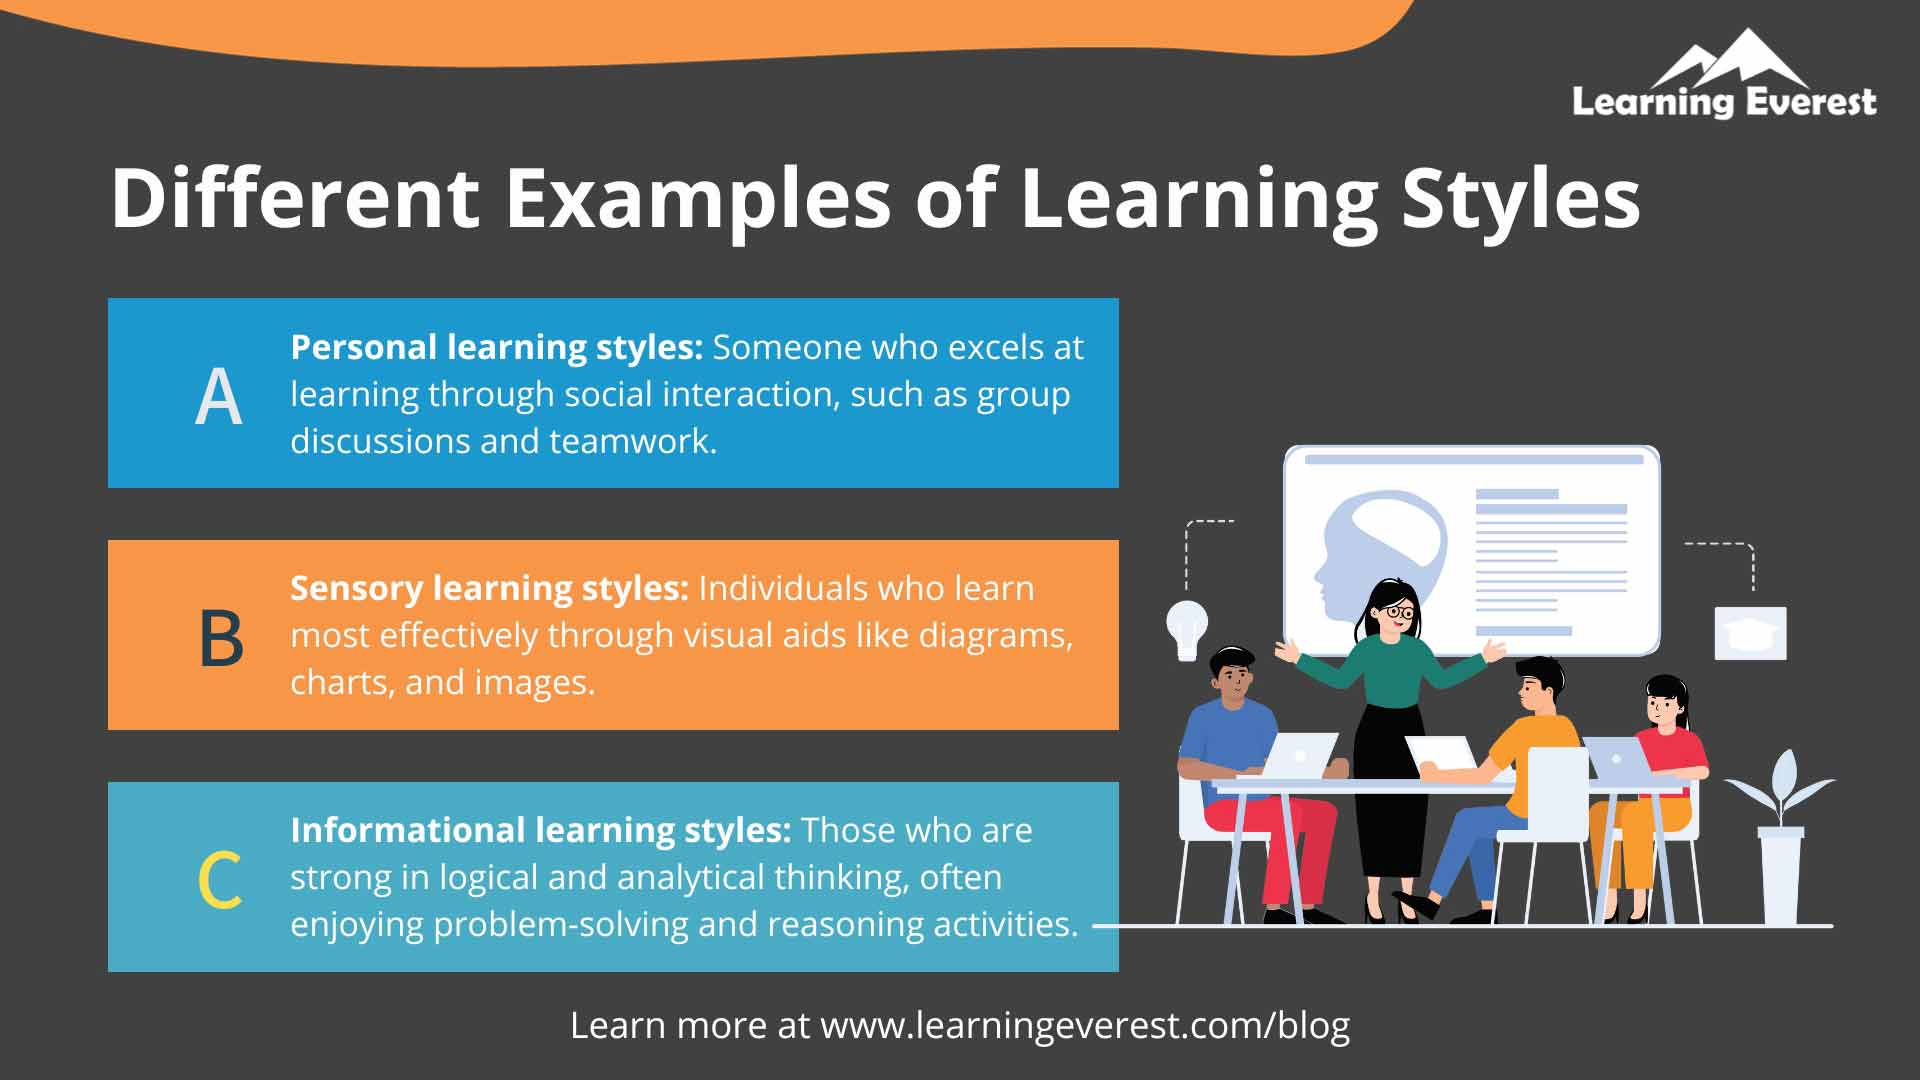 Different Types of Learning Styles